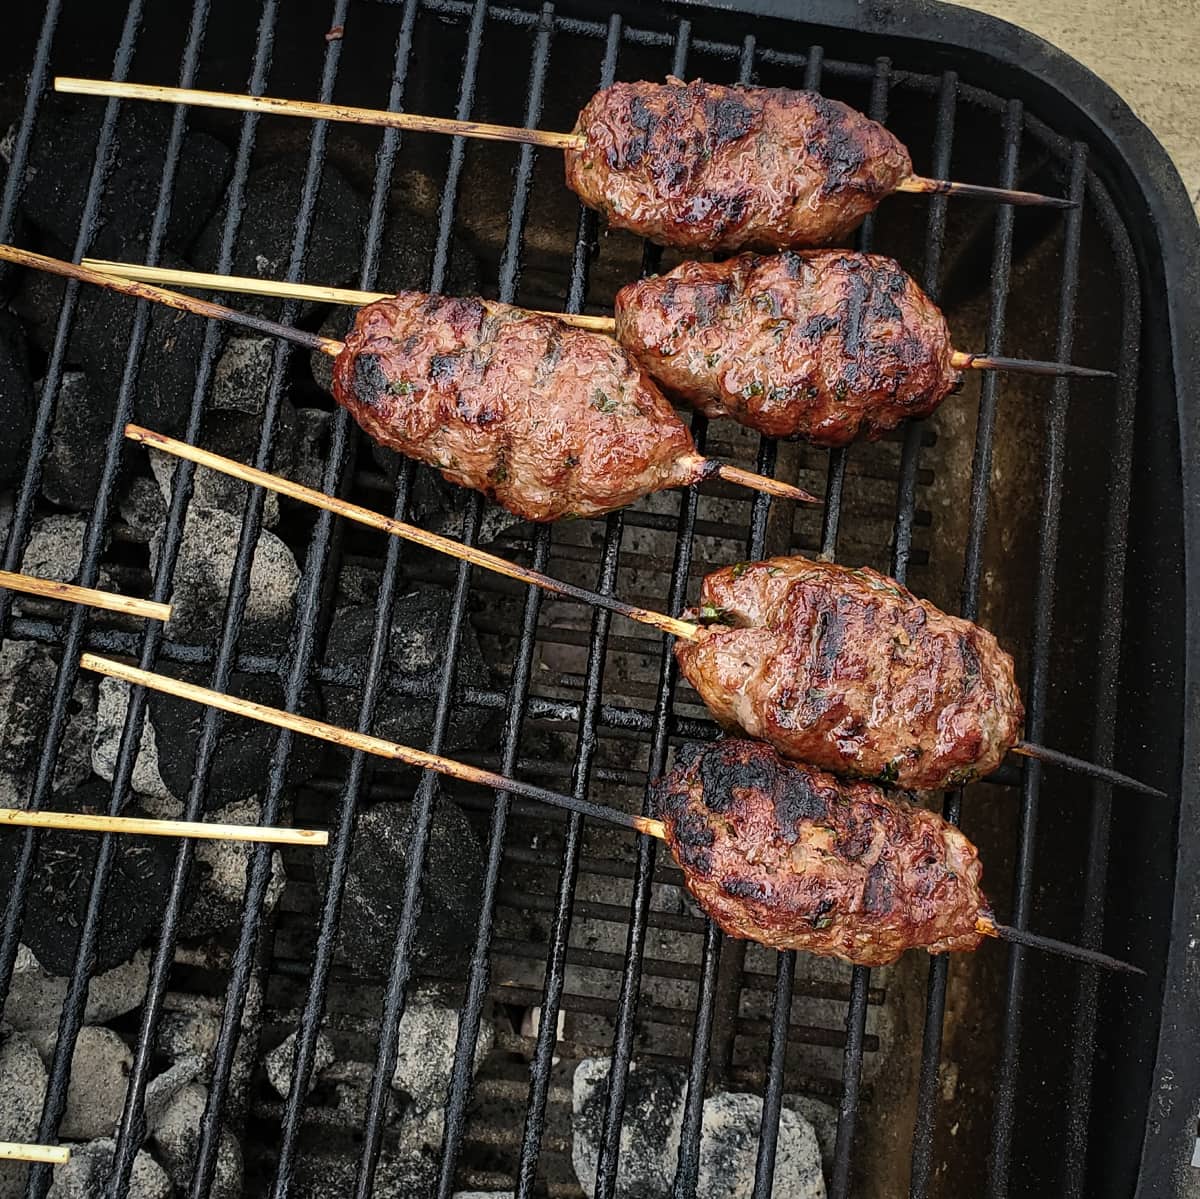 North African kefta kebabs on a PK grill.